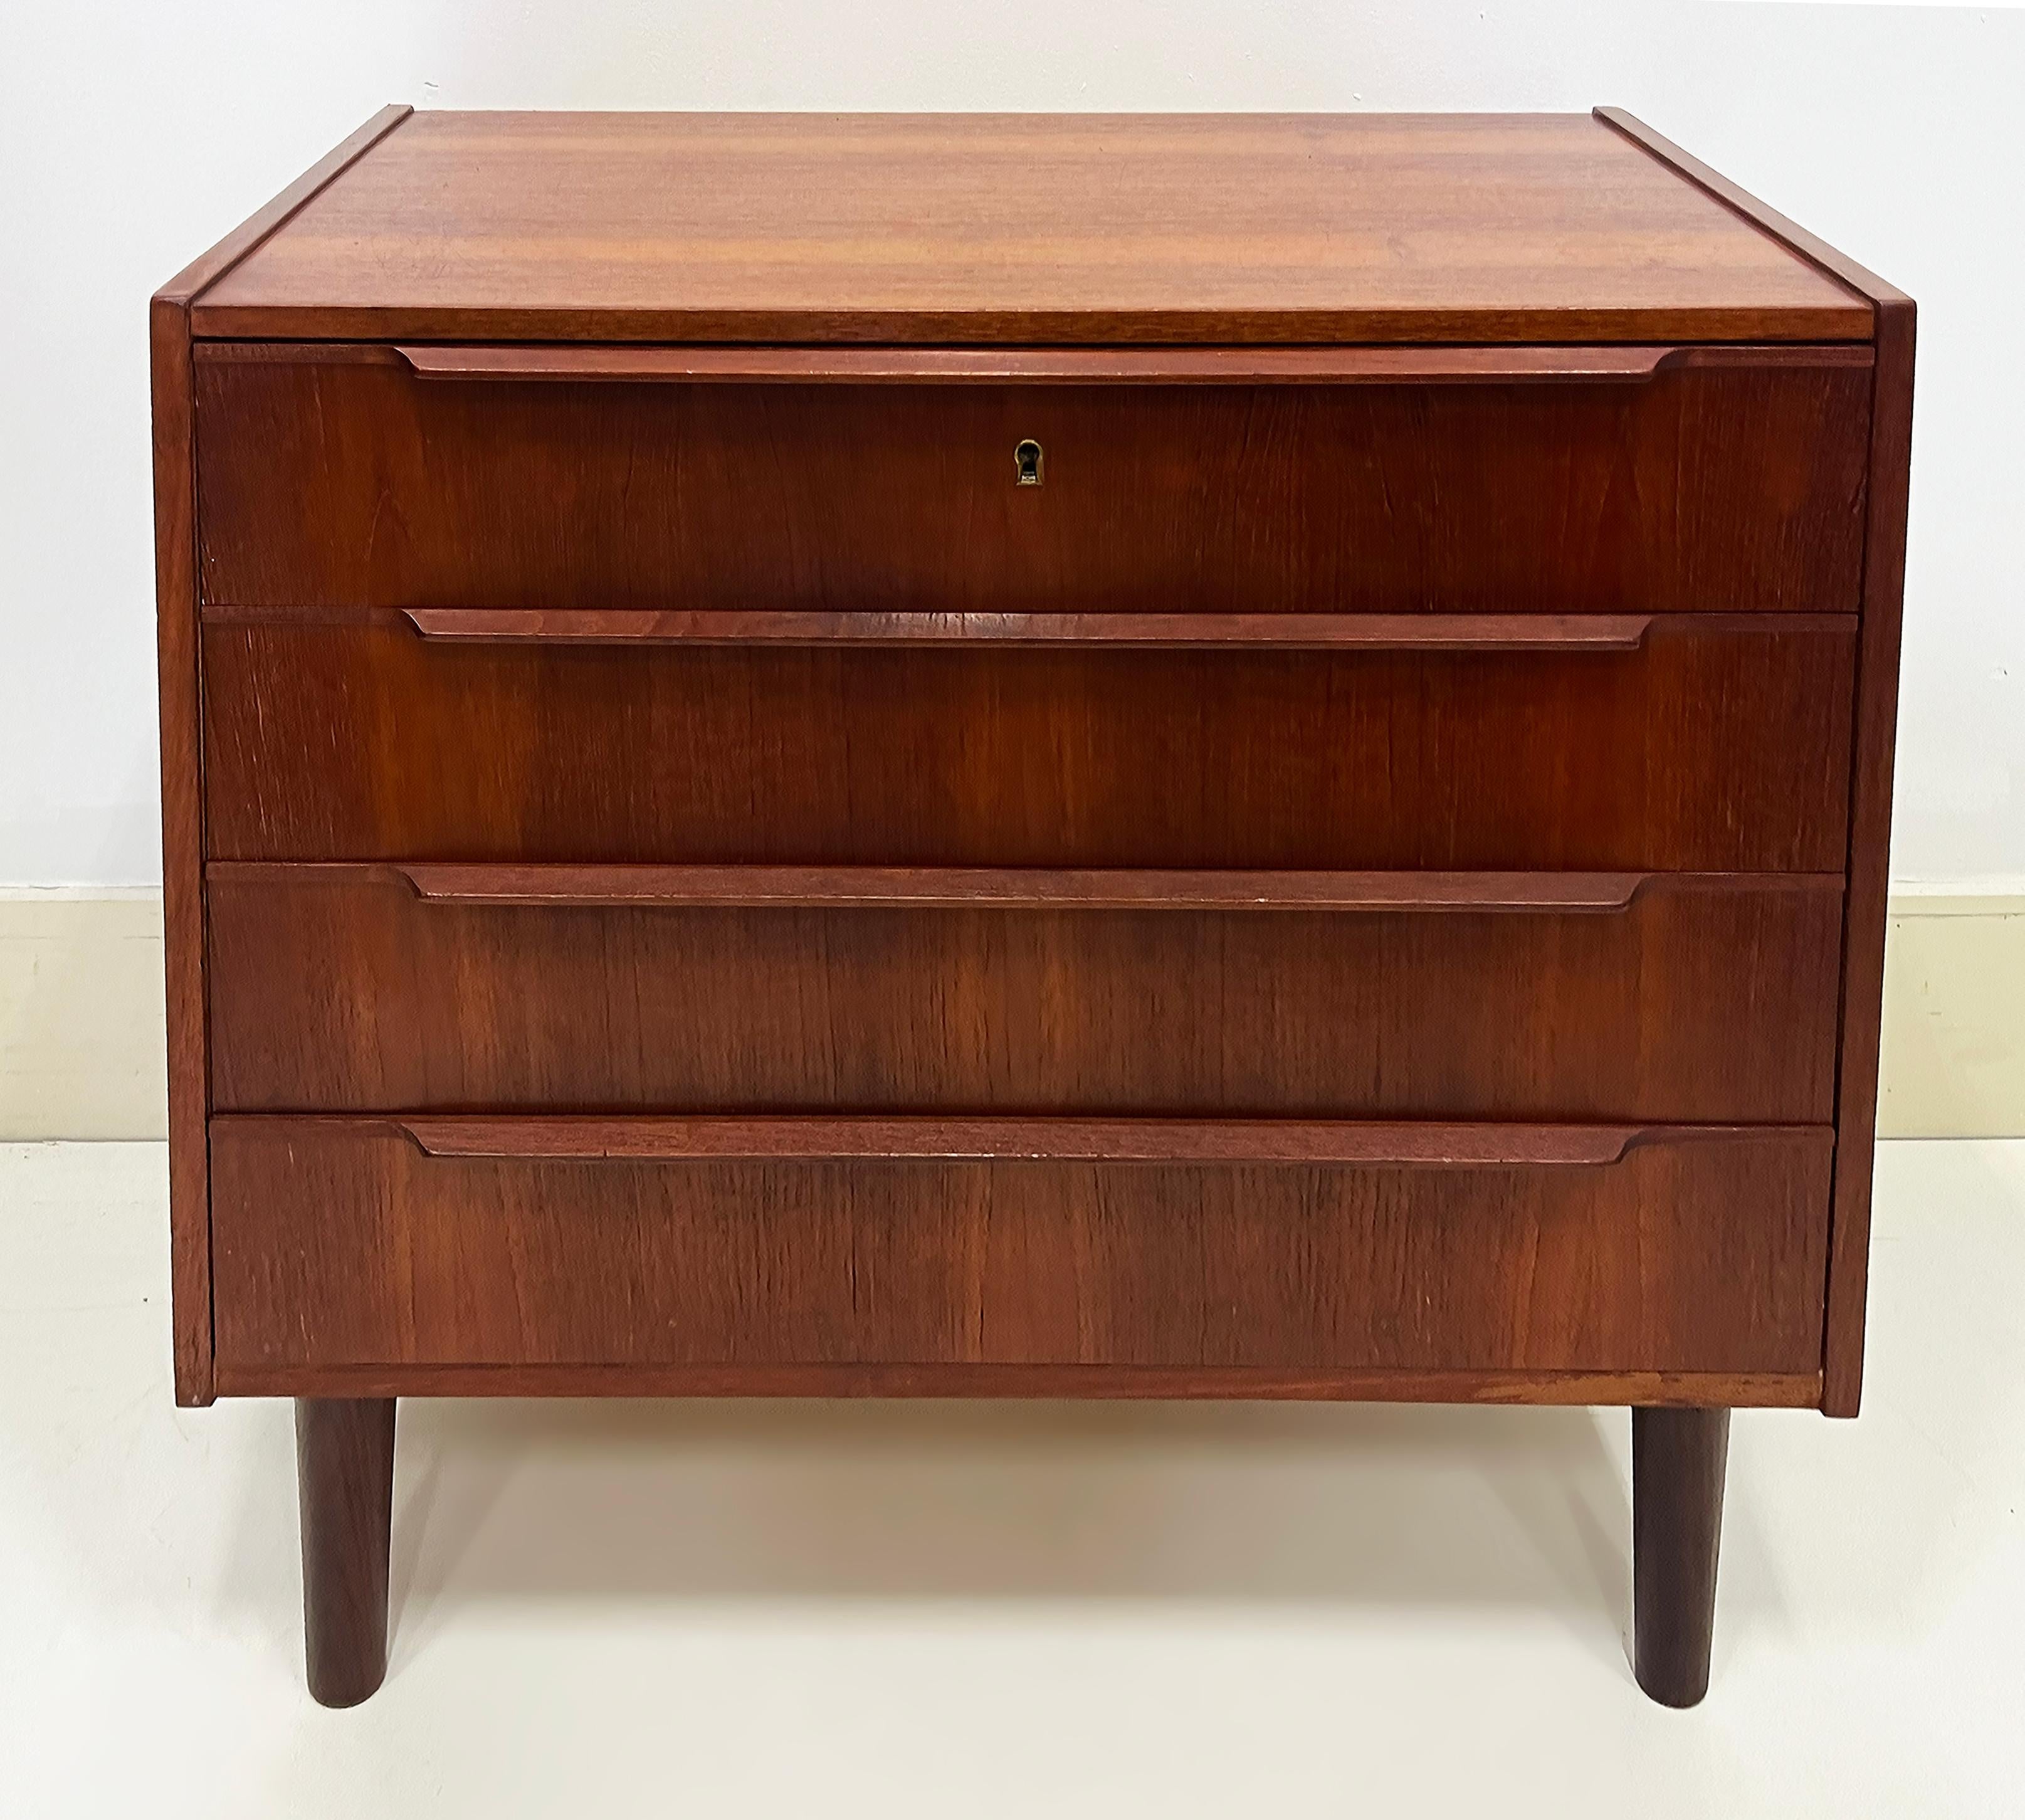 1950s Vintage Danish Modern Teak Cabinet with Lock and 4 Drawers In Good Condition For Sale In Miami, FL